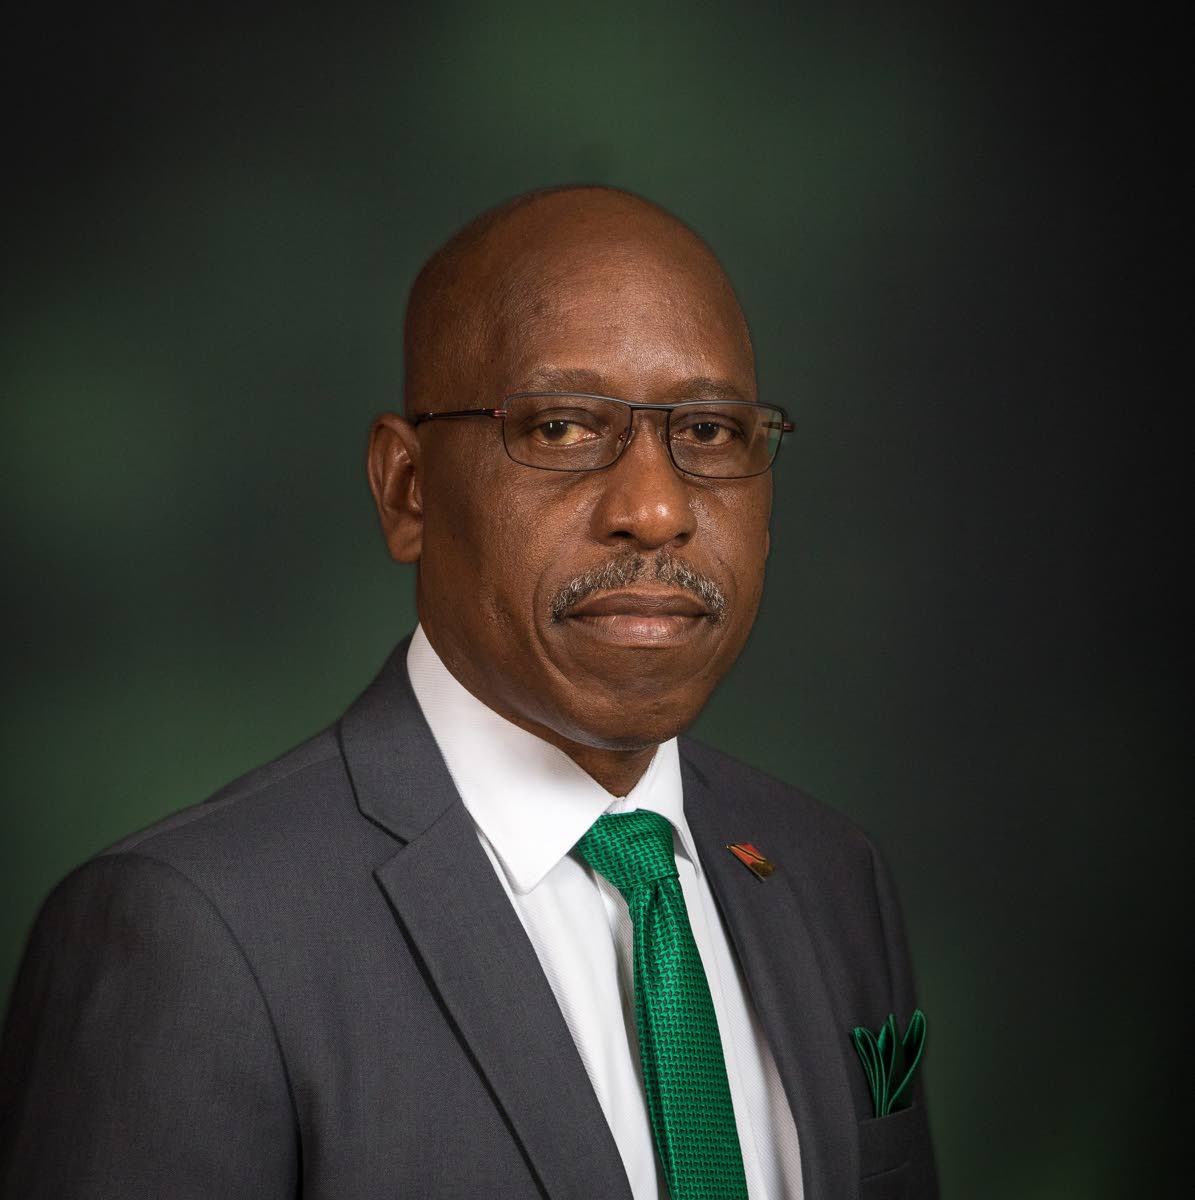 pdp-candidate-tobago-deserves-99-of-its-energy-revenue-trinidad-and